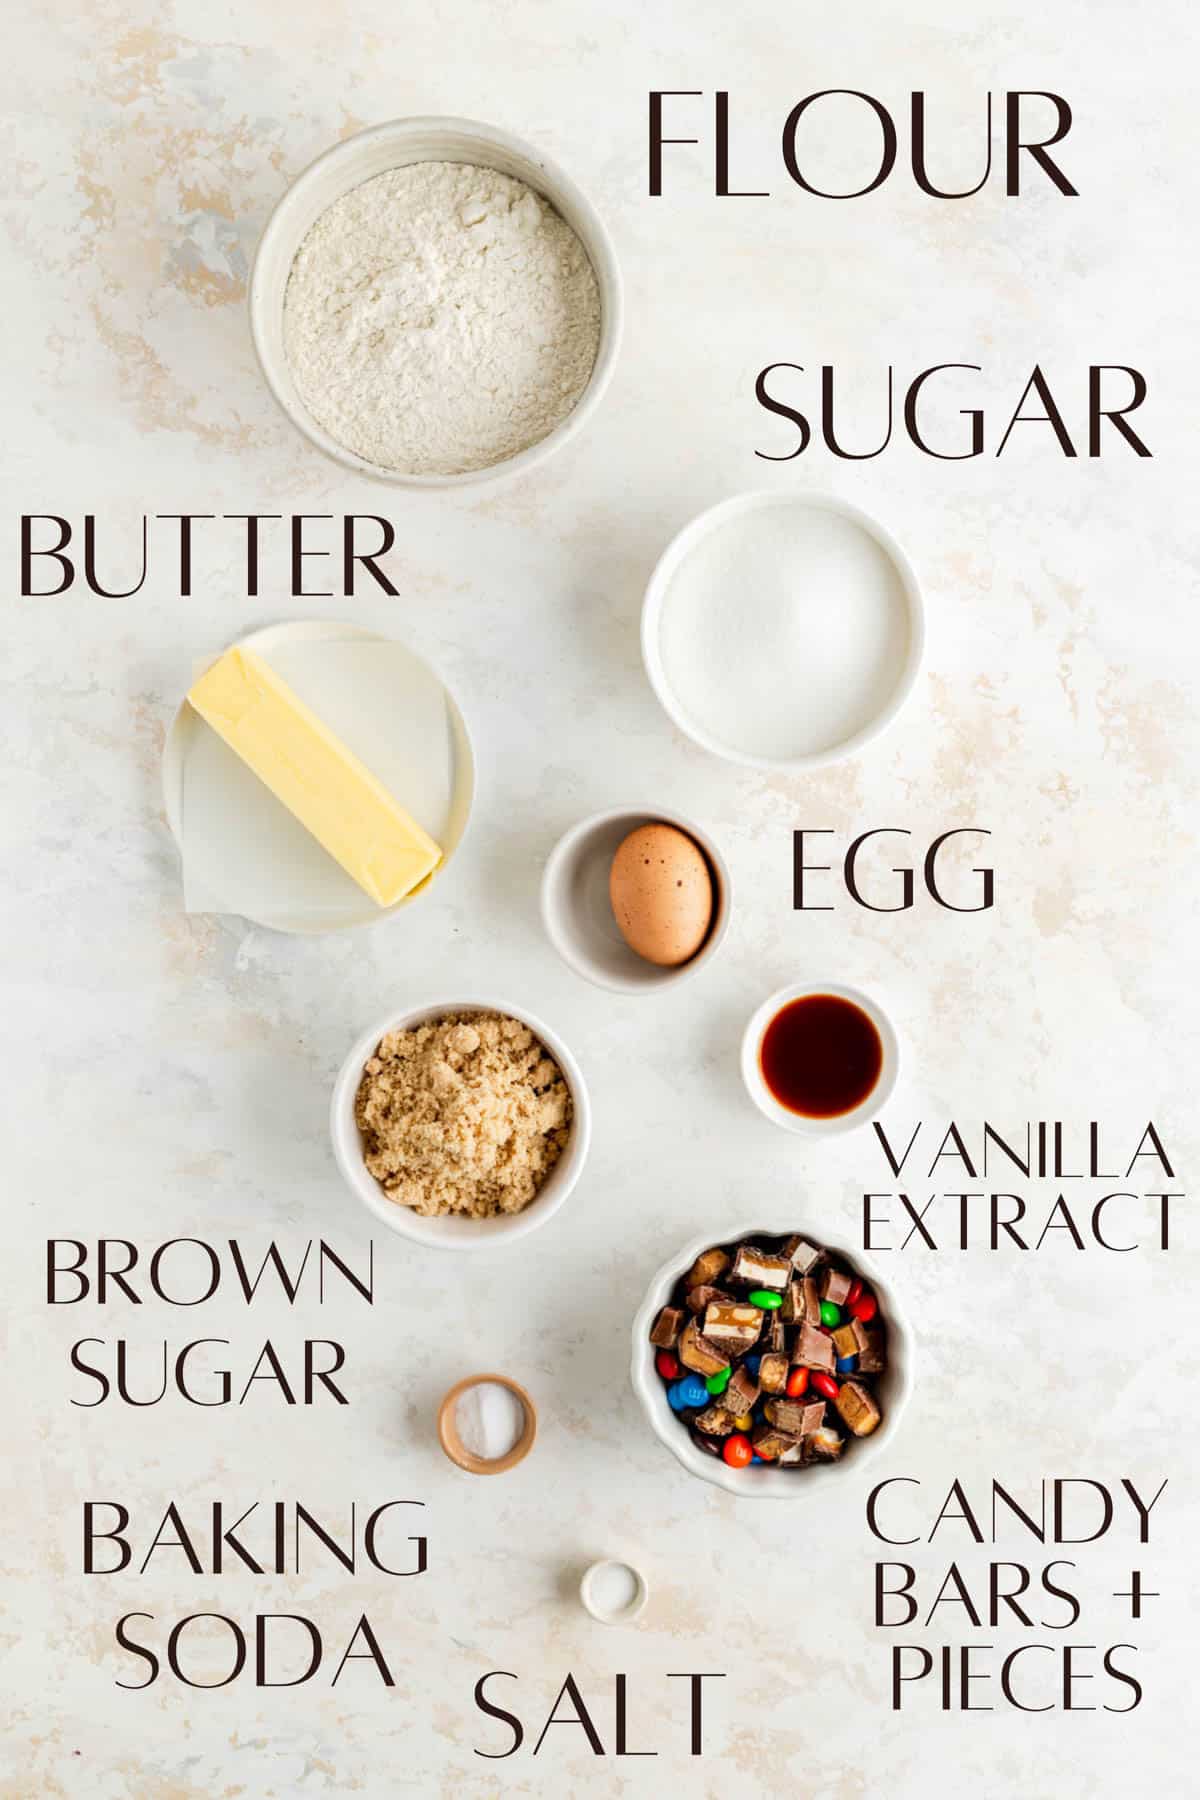 labeled ingredients for candy bar cookies in individual white bowls on white plaster background.